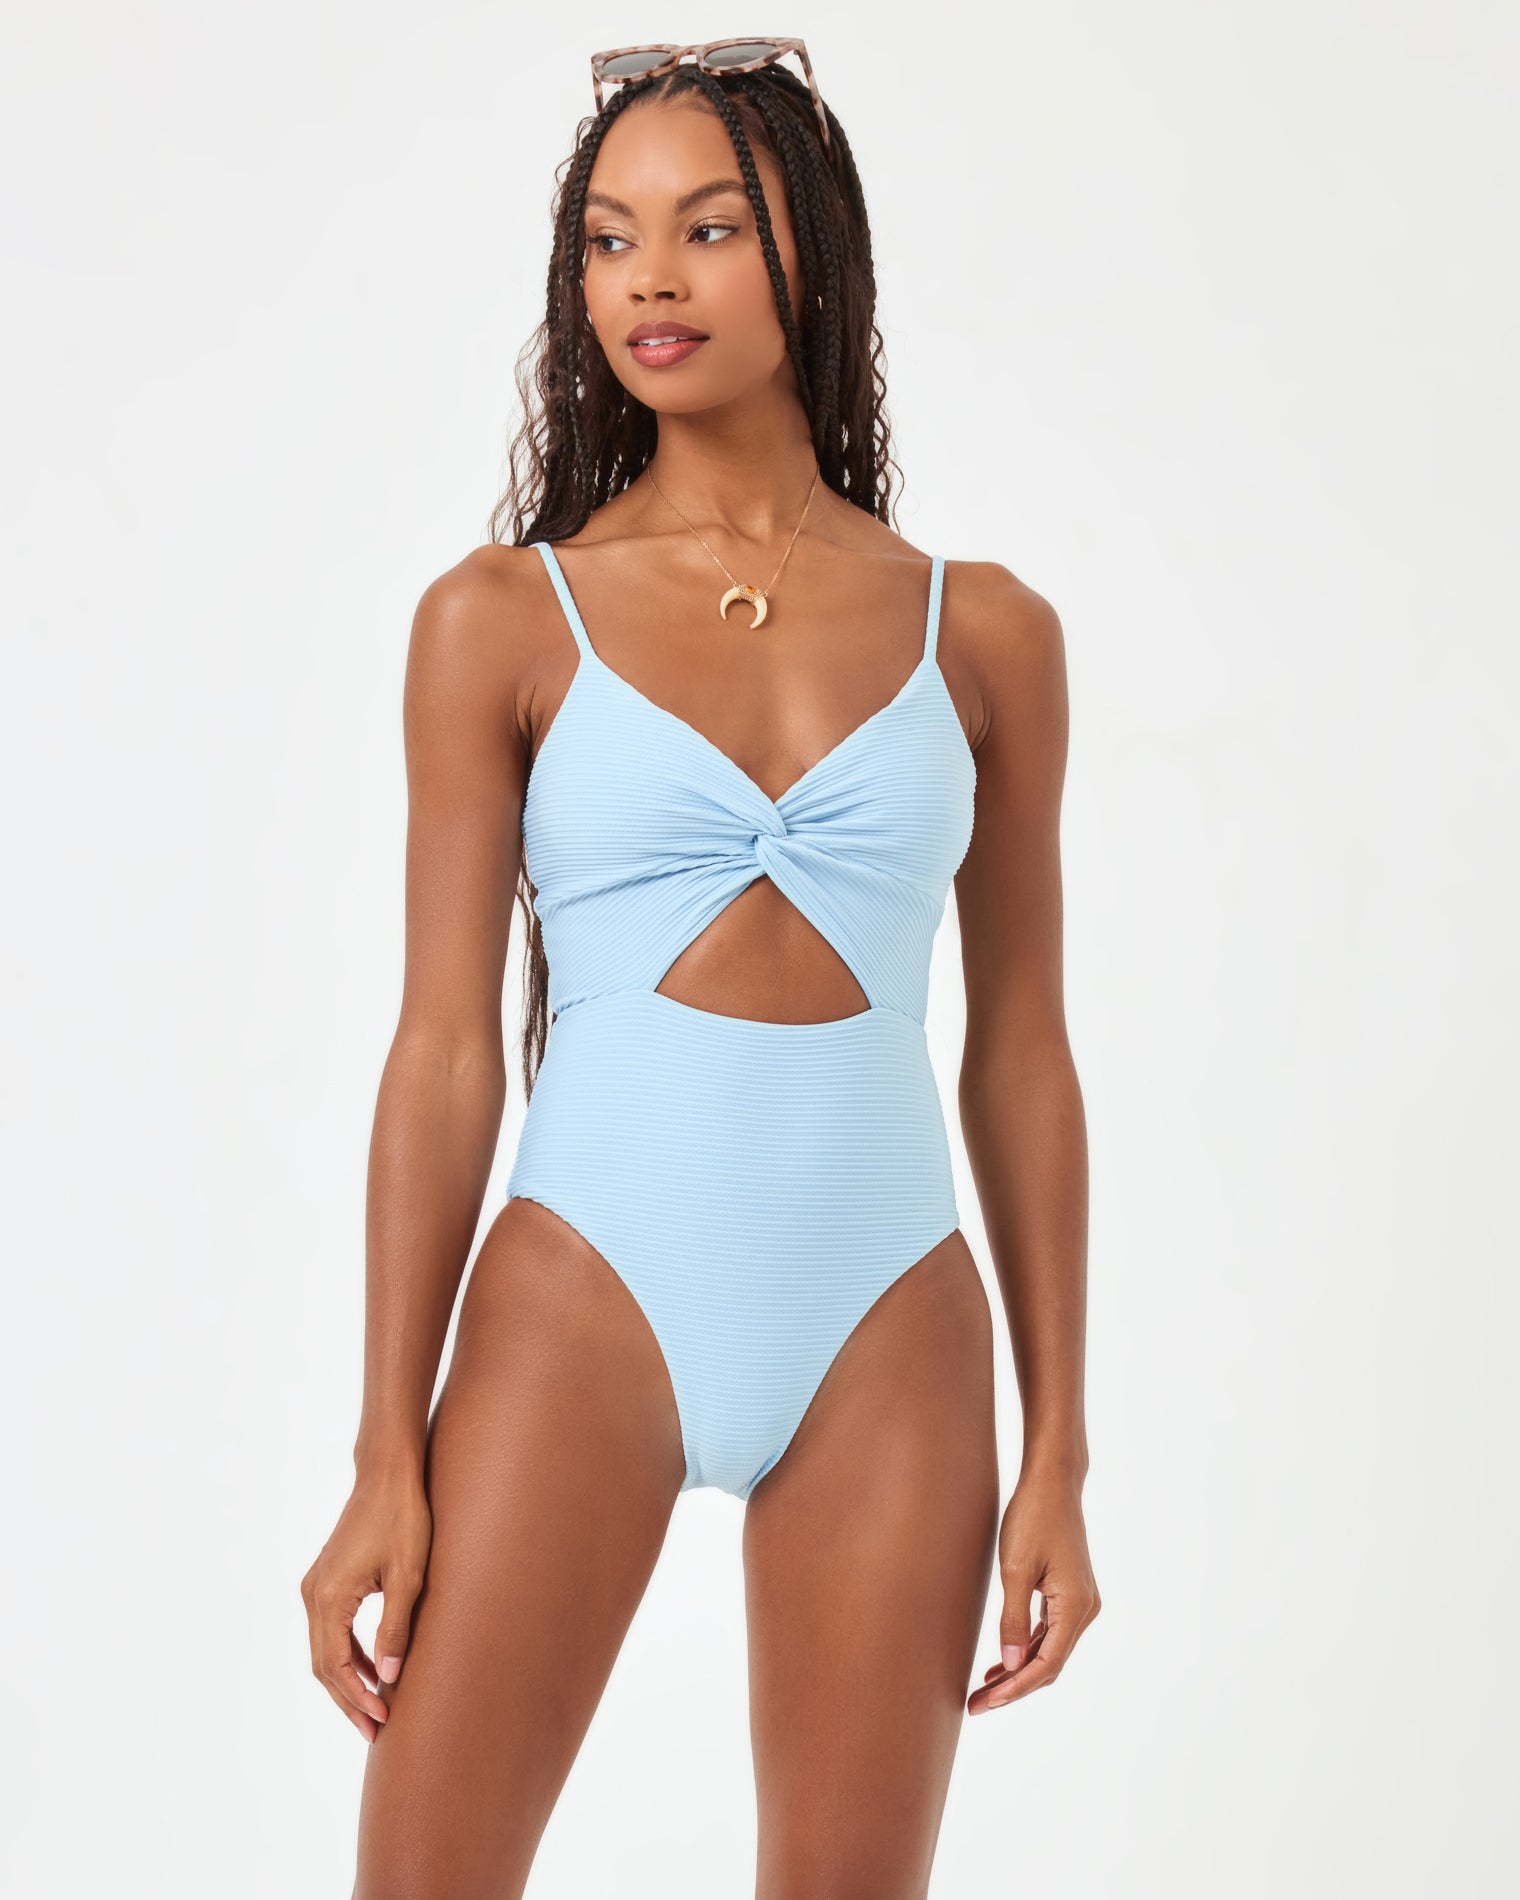 Eco Chic Repreve® Kyslee One Piece Swimsuit - Sky Blue Sky Blue | Model: Taelor (size: S) | Hover